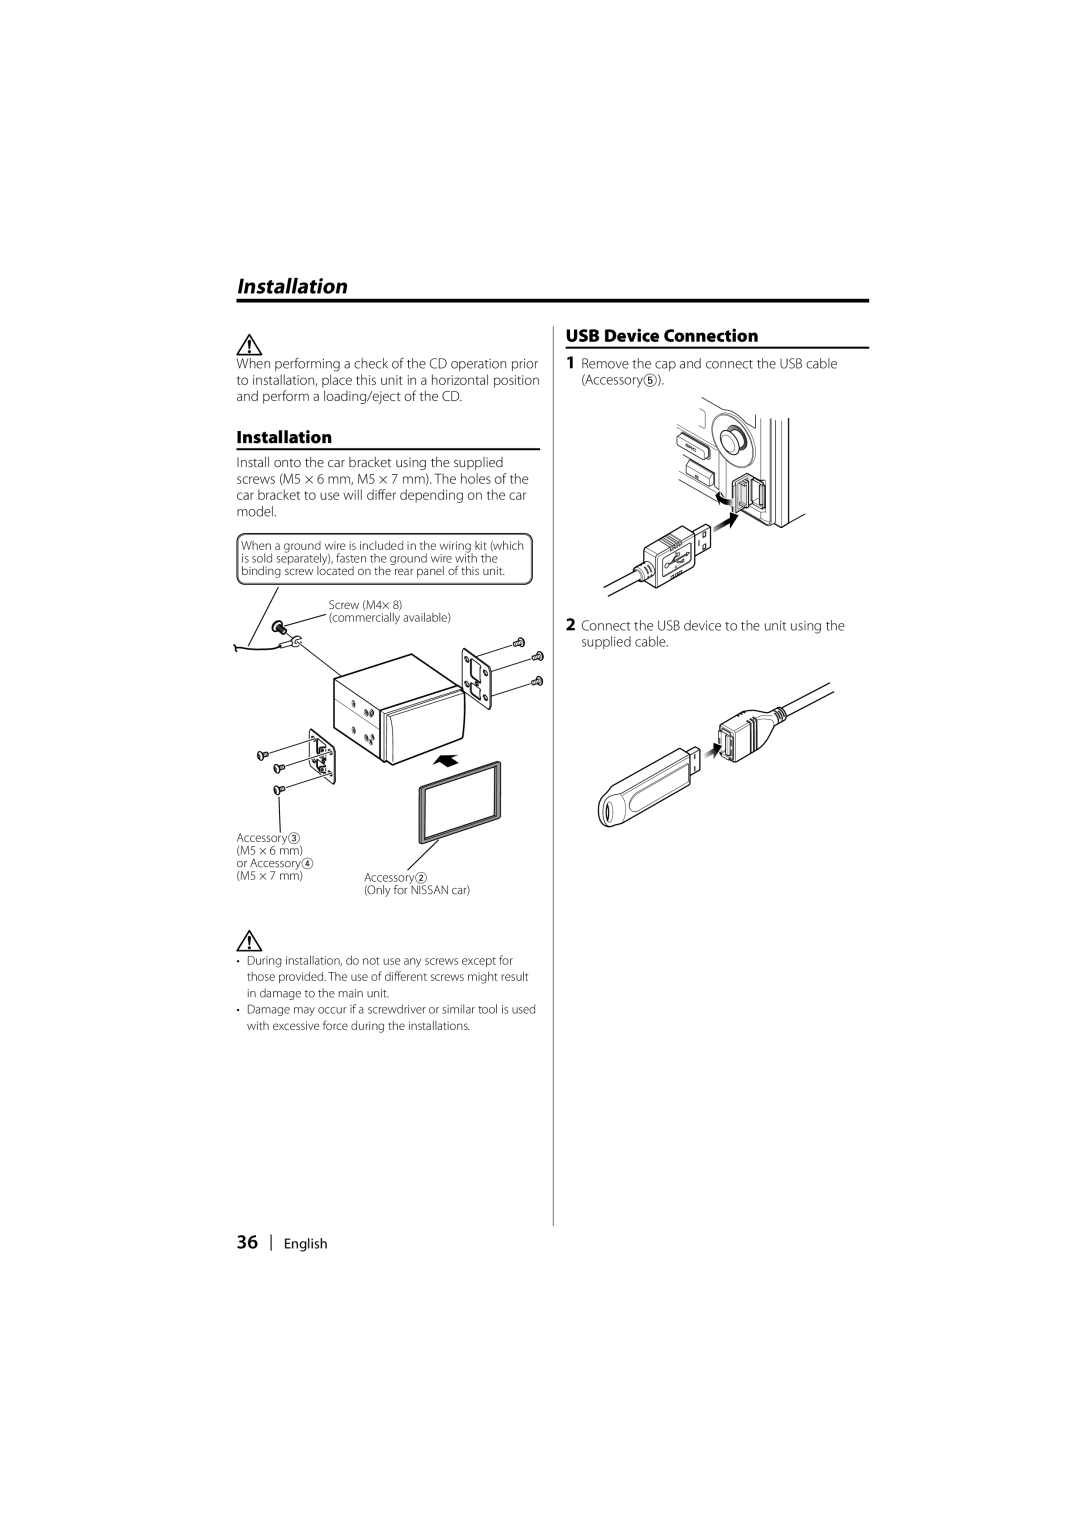 Kenwood DPX-MP2090U instruction manual Installation, USB Device Connection 